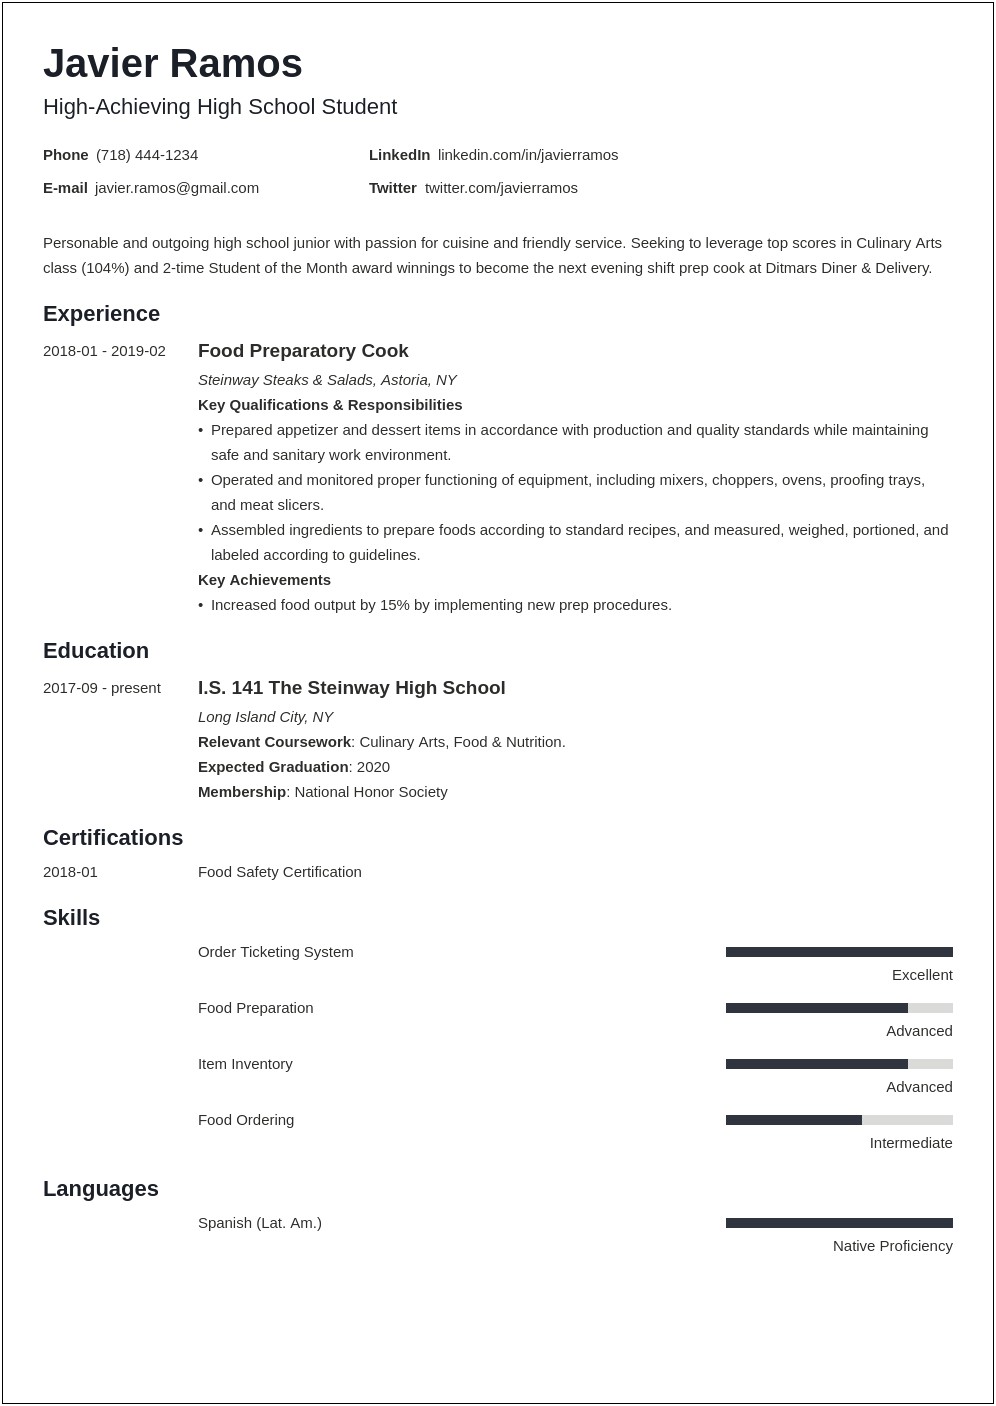 Examples Of Youth Objectives For Resumes